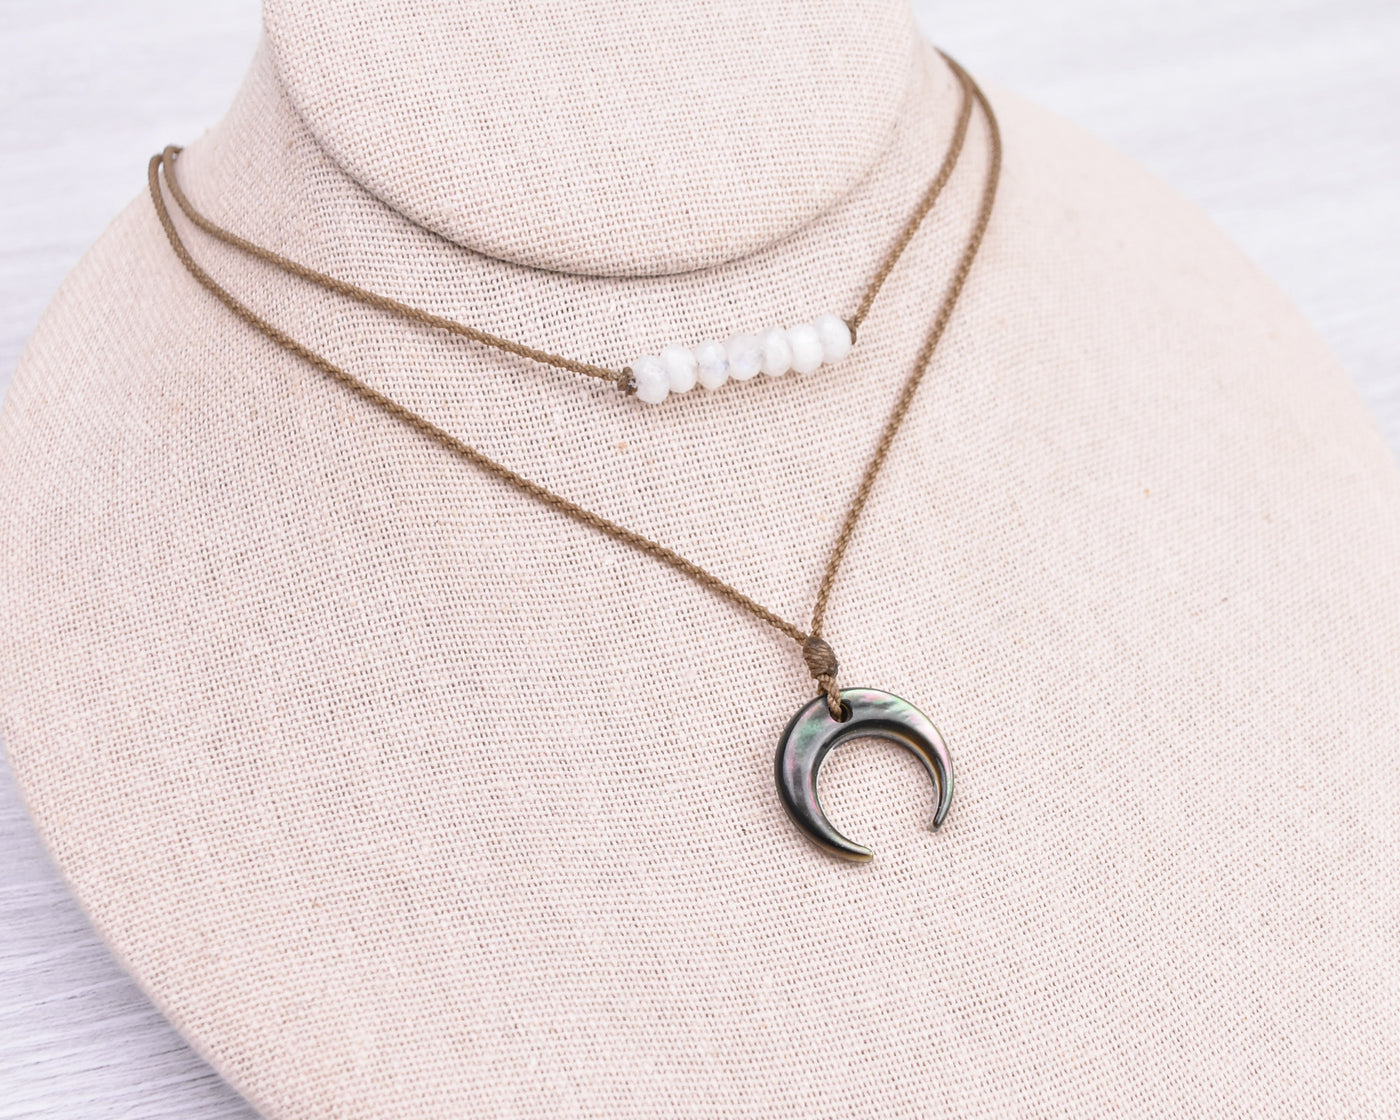 Over The Moon - Necklace Stack (10% off)